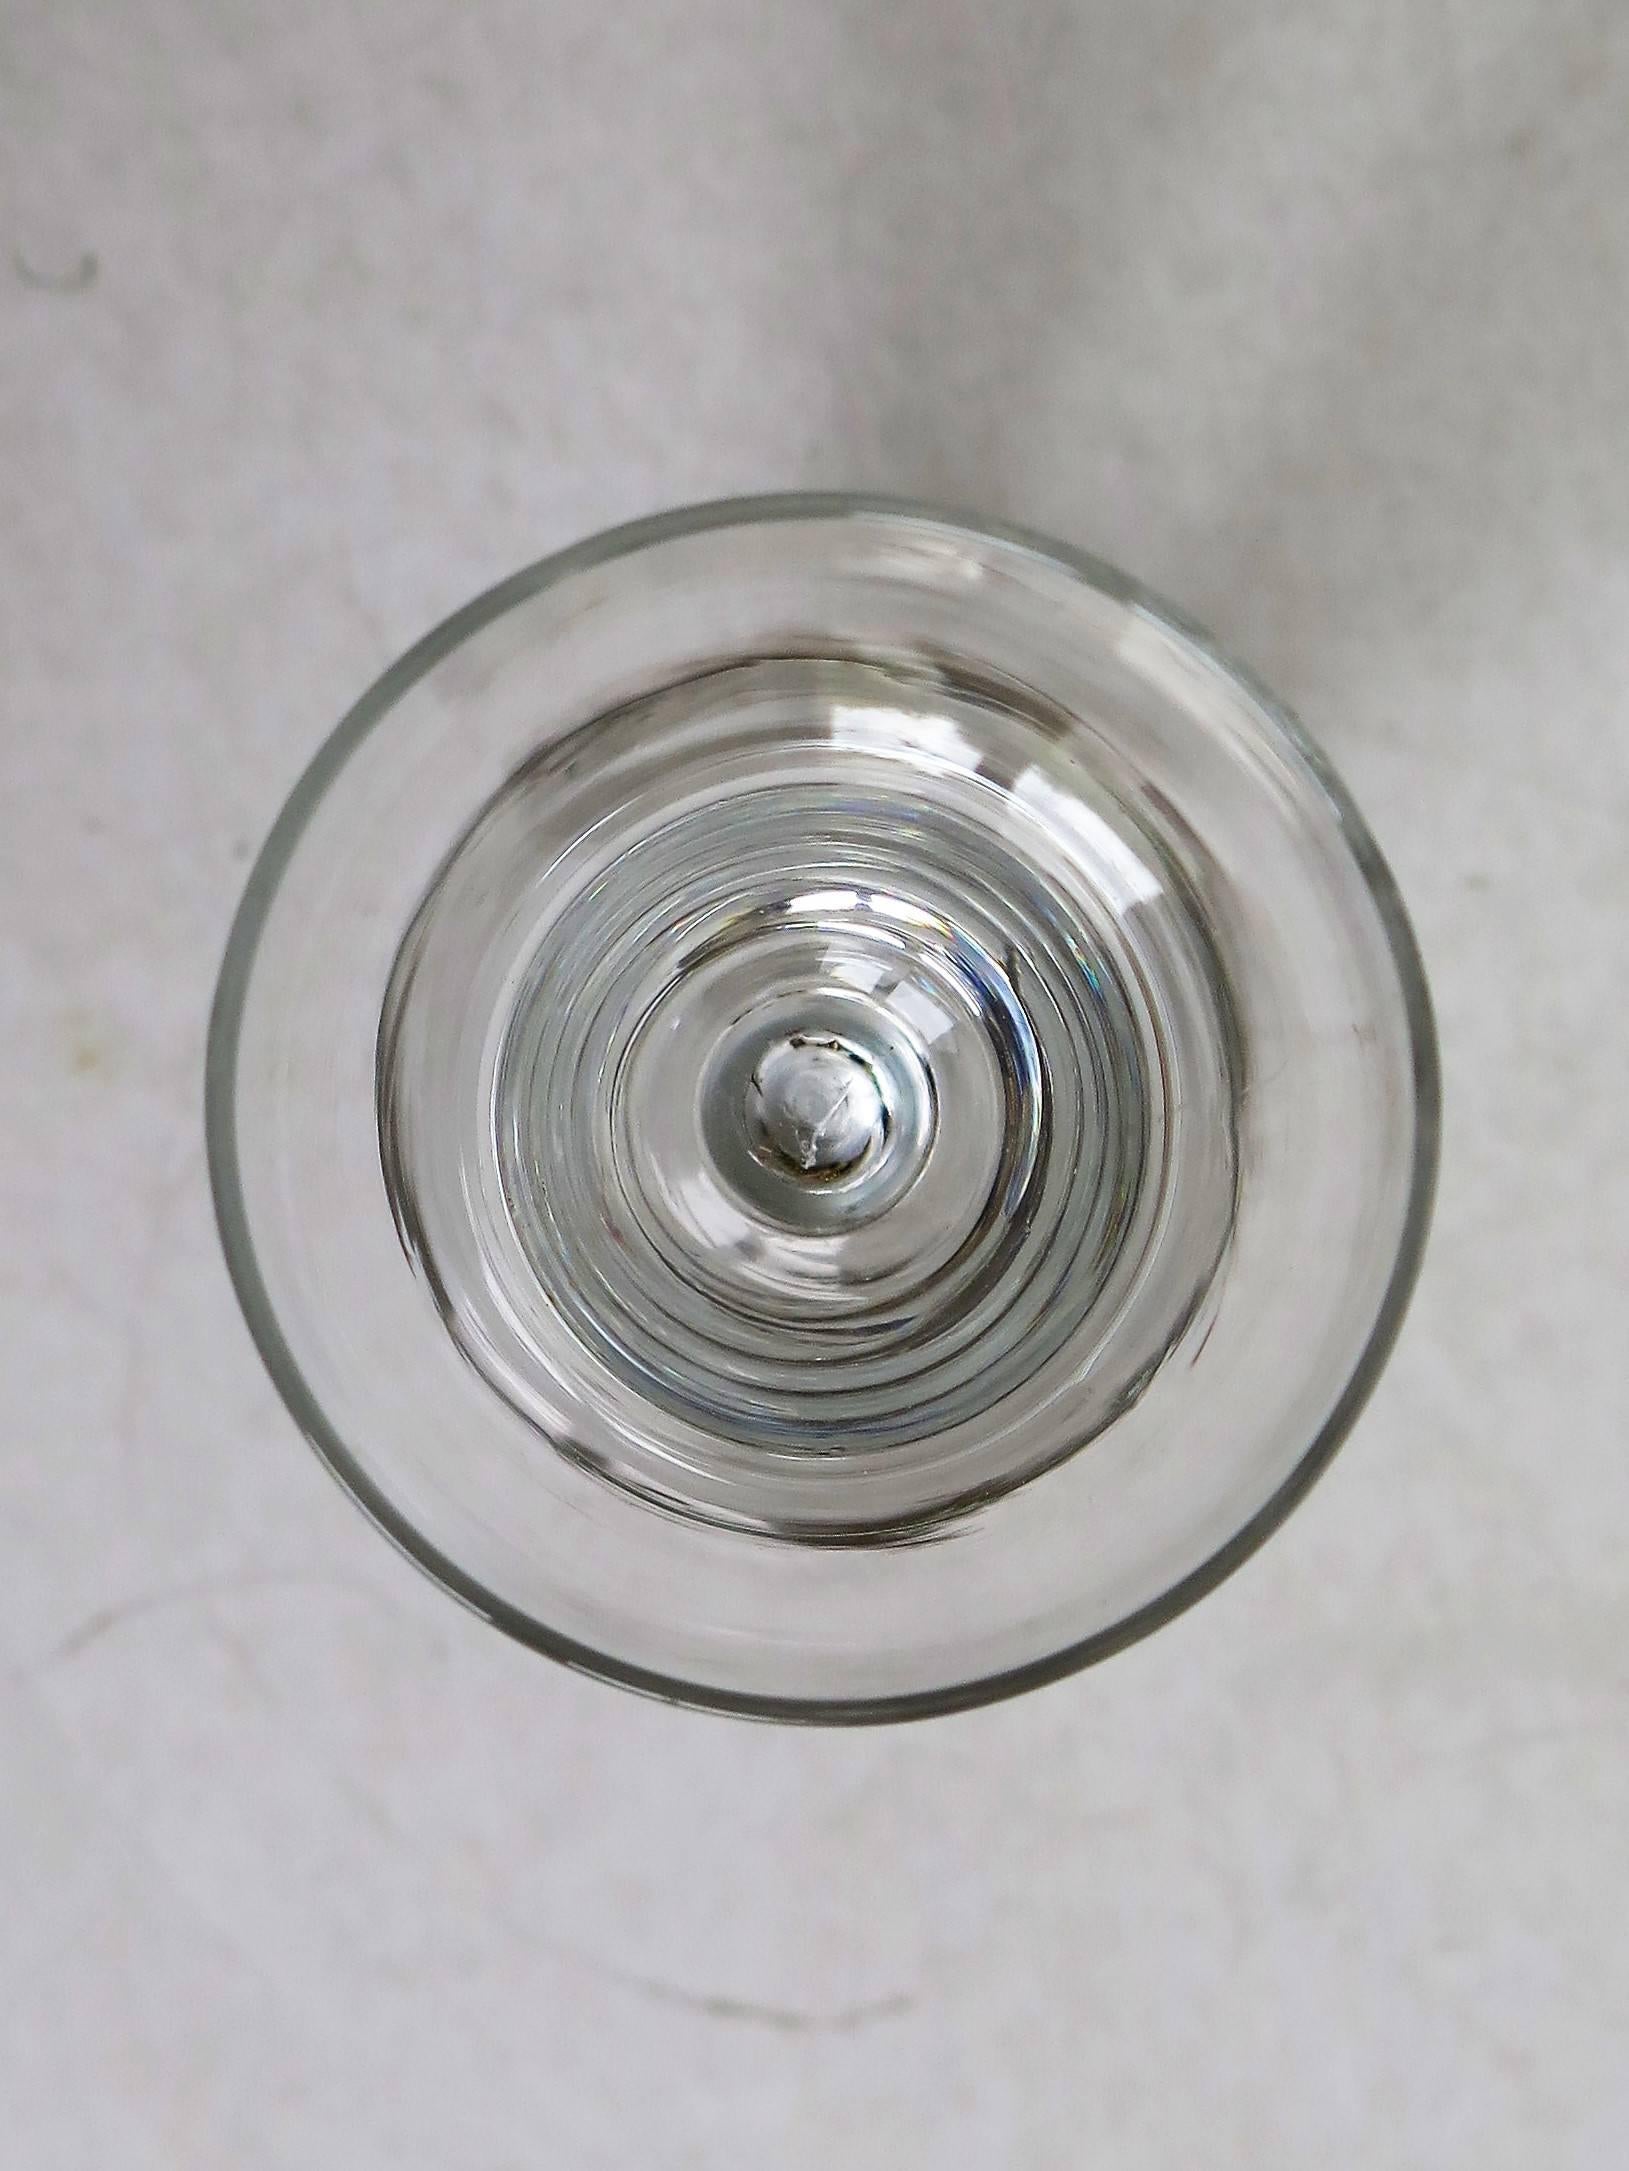 George 2nd Wine Glass Rare Pan Topped Bowl and Mercury Air Twist Stem, Ca 1755 1